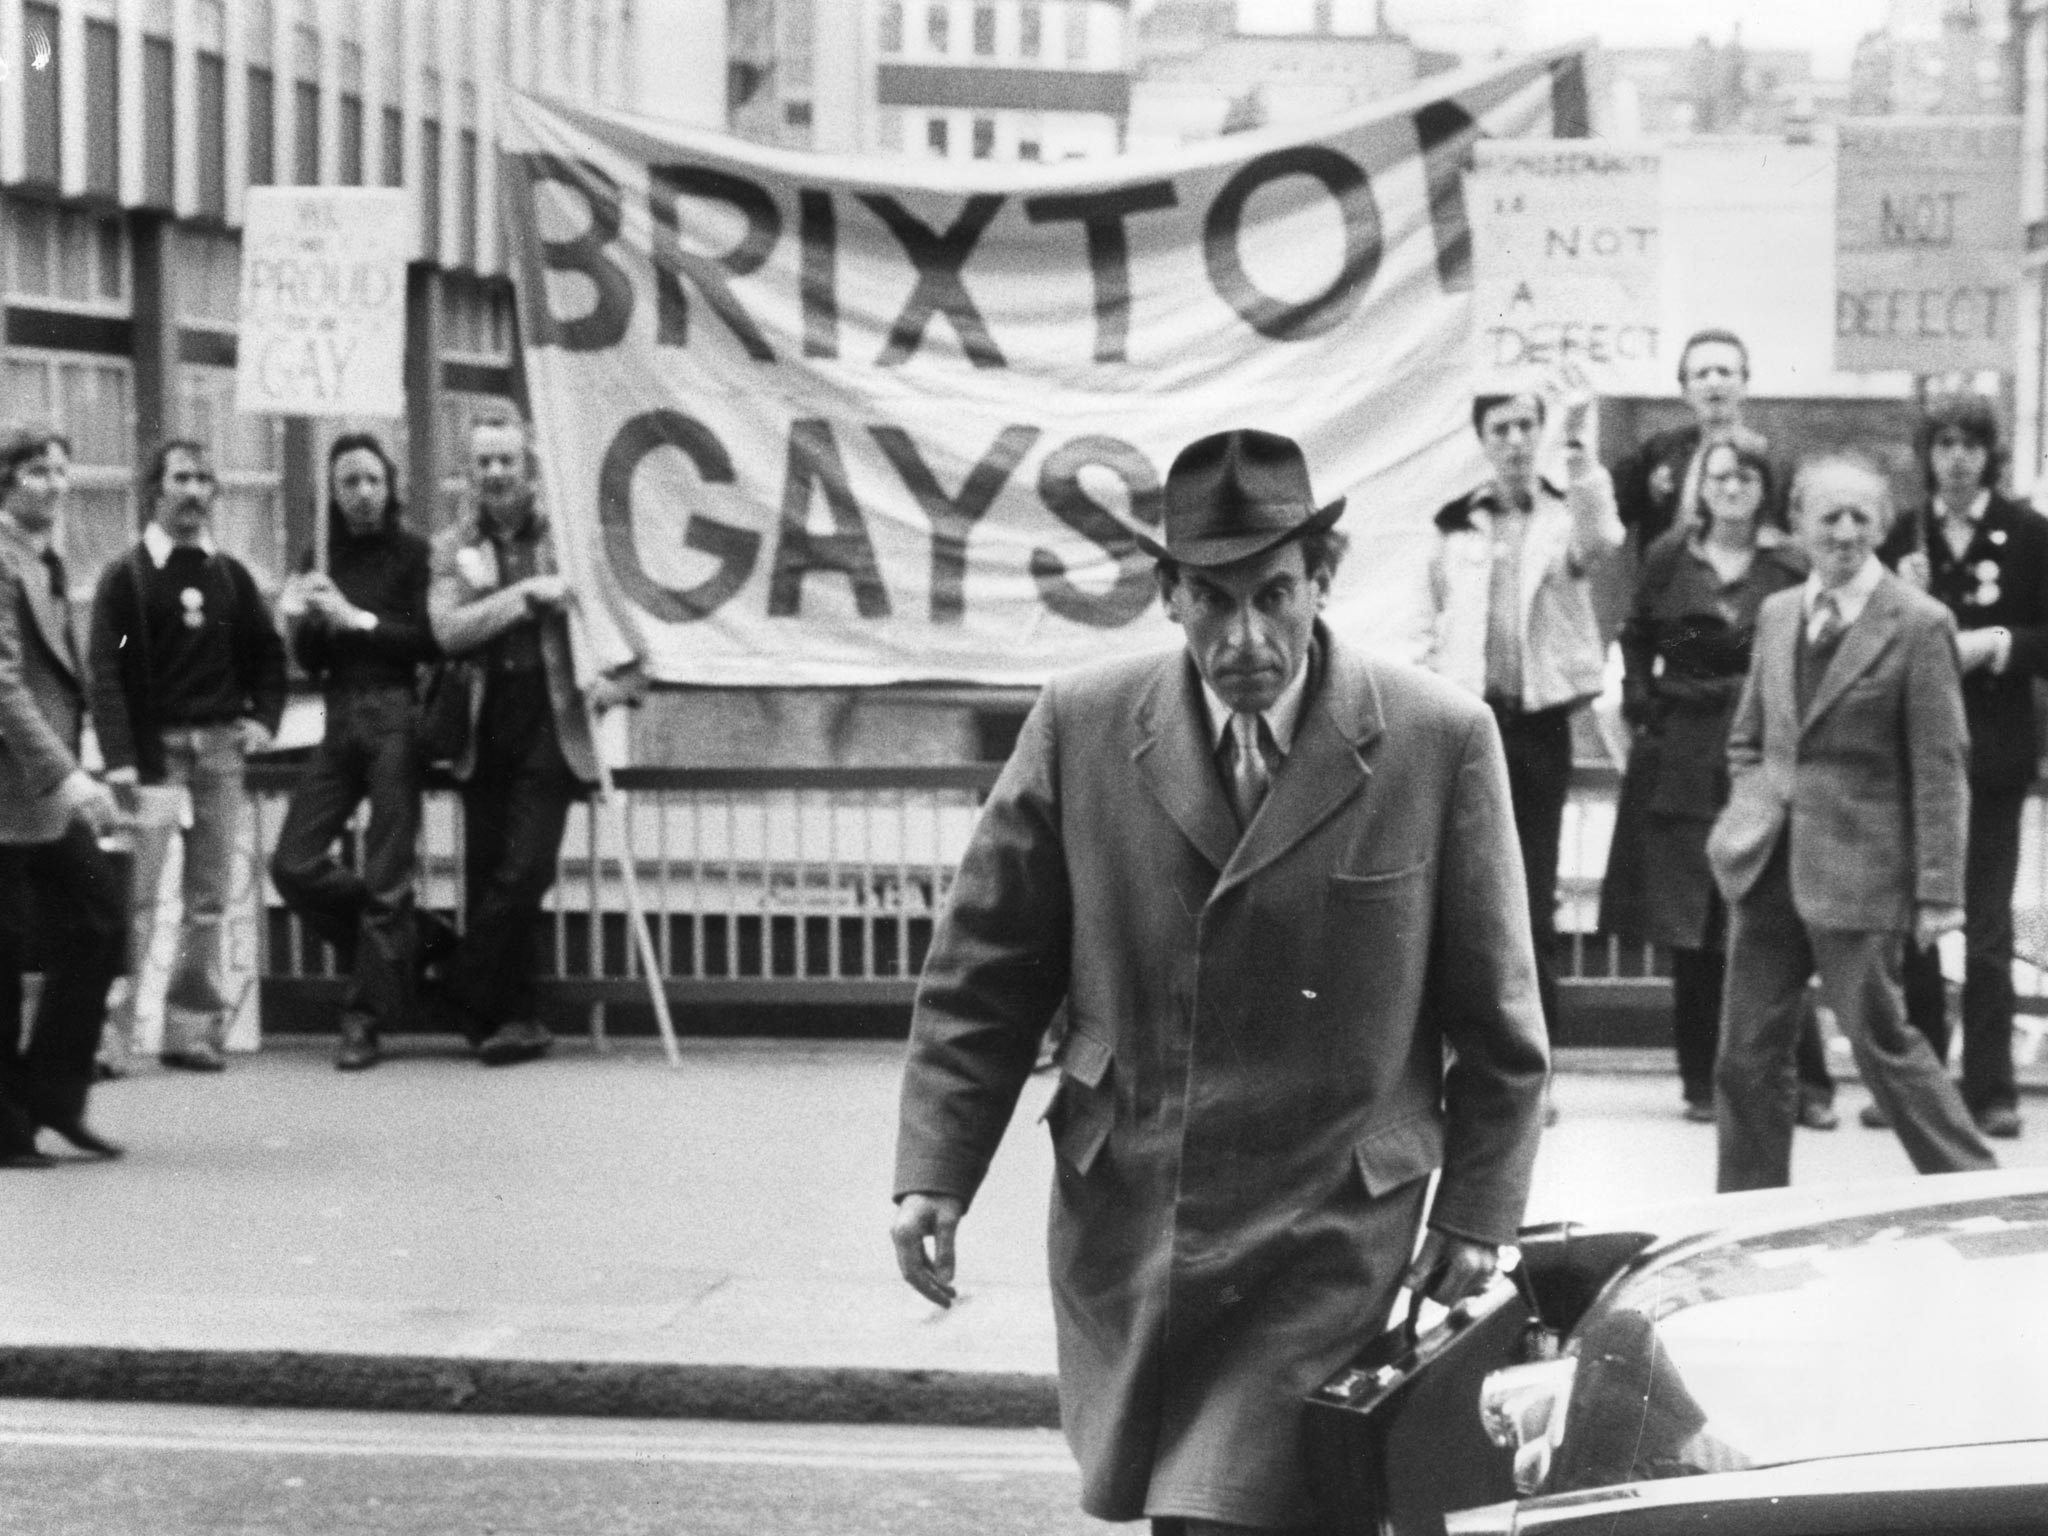 Jeremy Thorpe arriving at the Old Bailey in 1979 where he was tried for conspiracy to murder